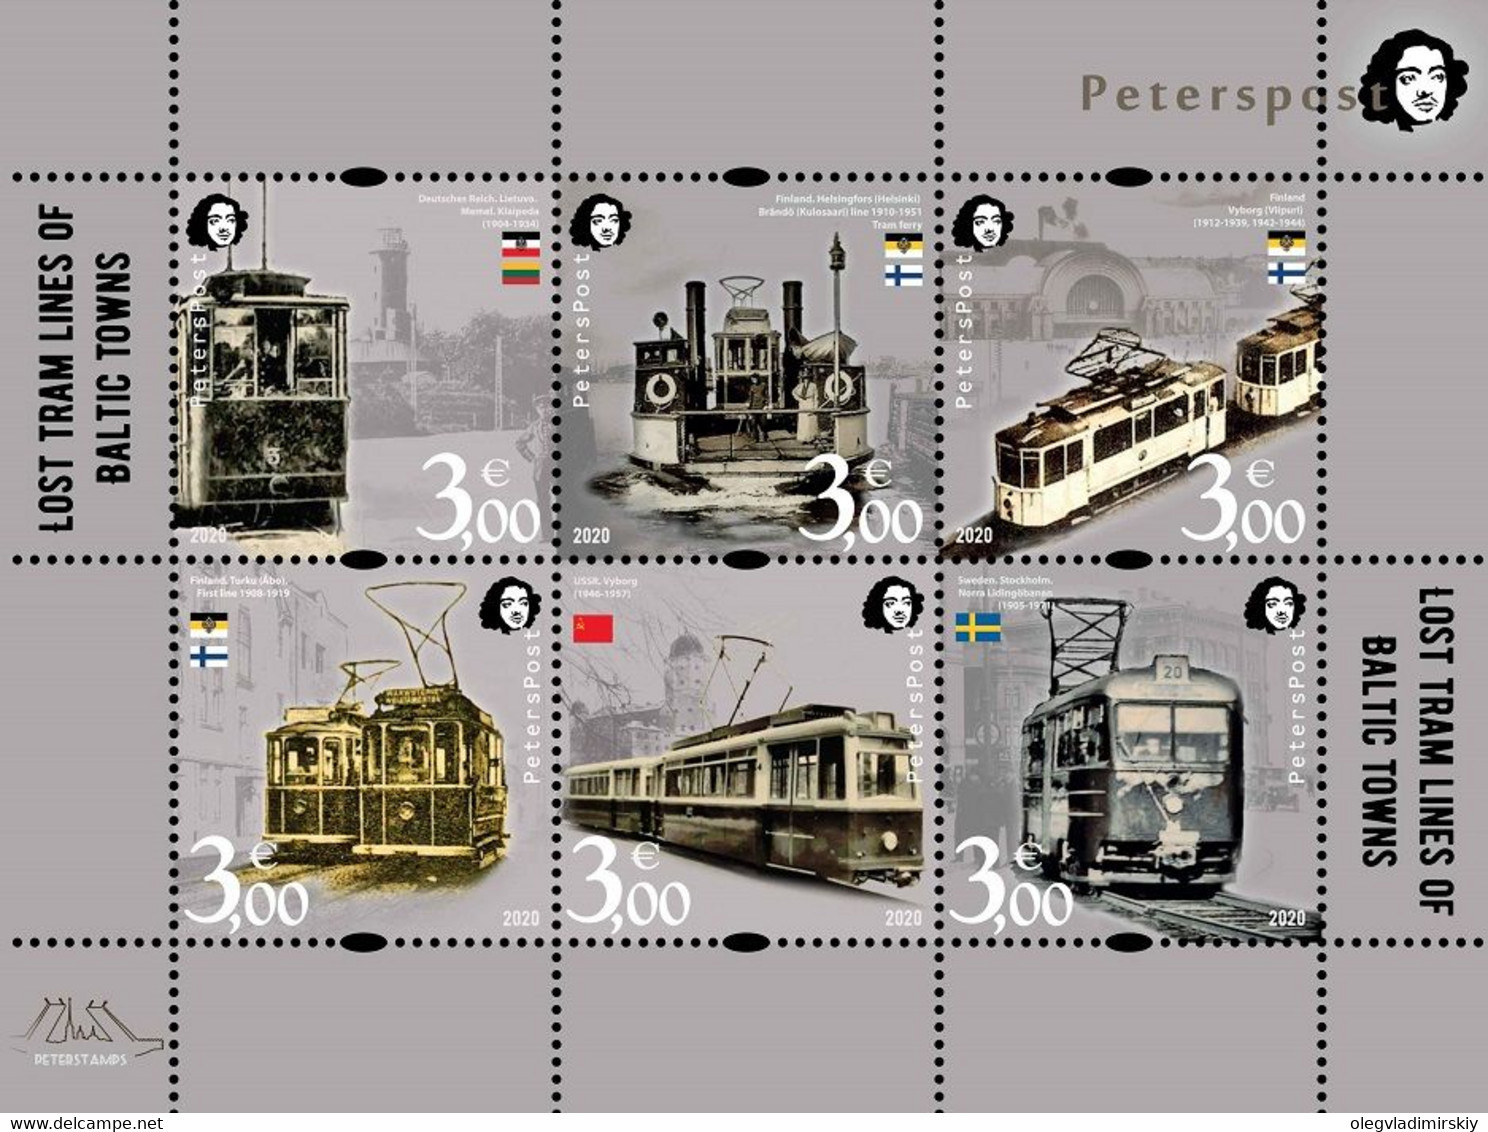 Finland Finnland Finlande 2020 Lost Tram Lines Of Baltic Towns Peterspost Set Of 6 Stamps In Block Mint - Tranvie